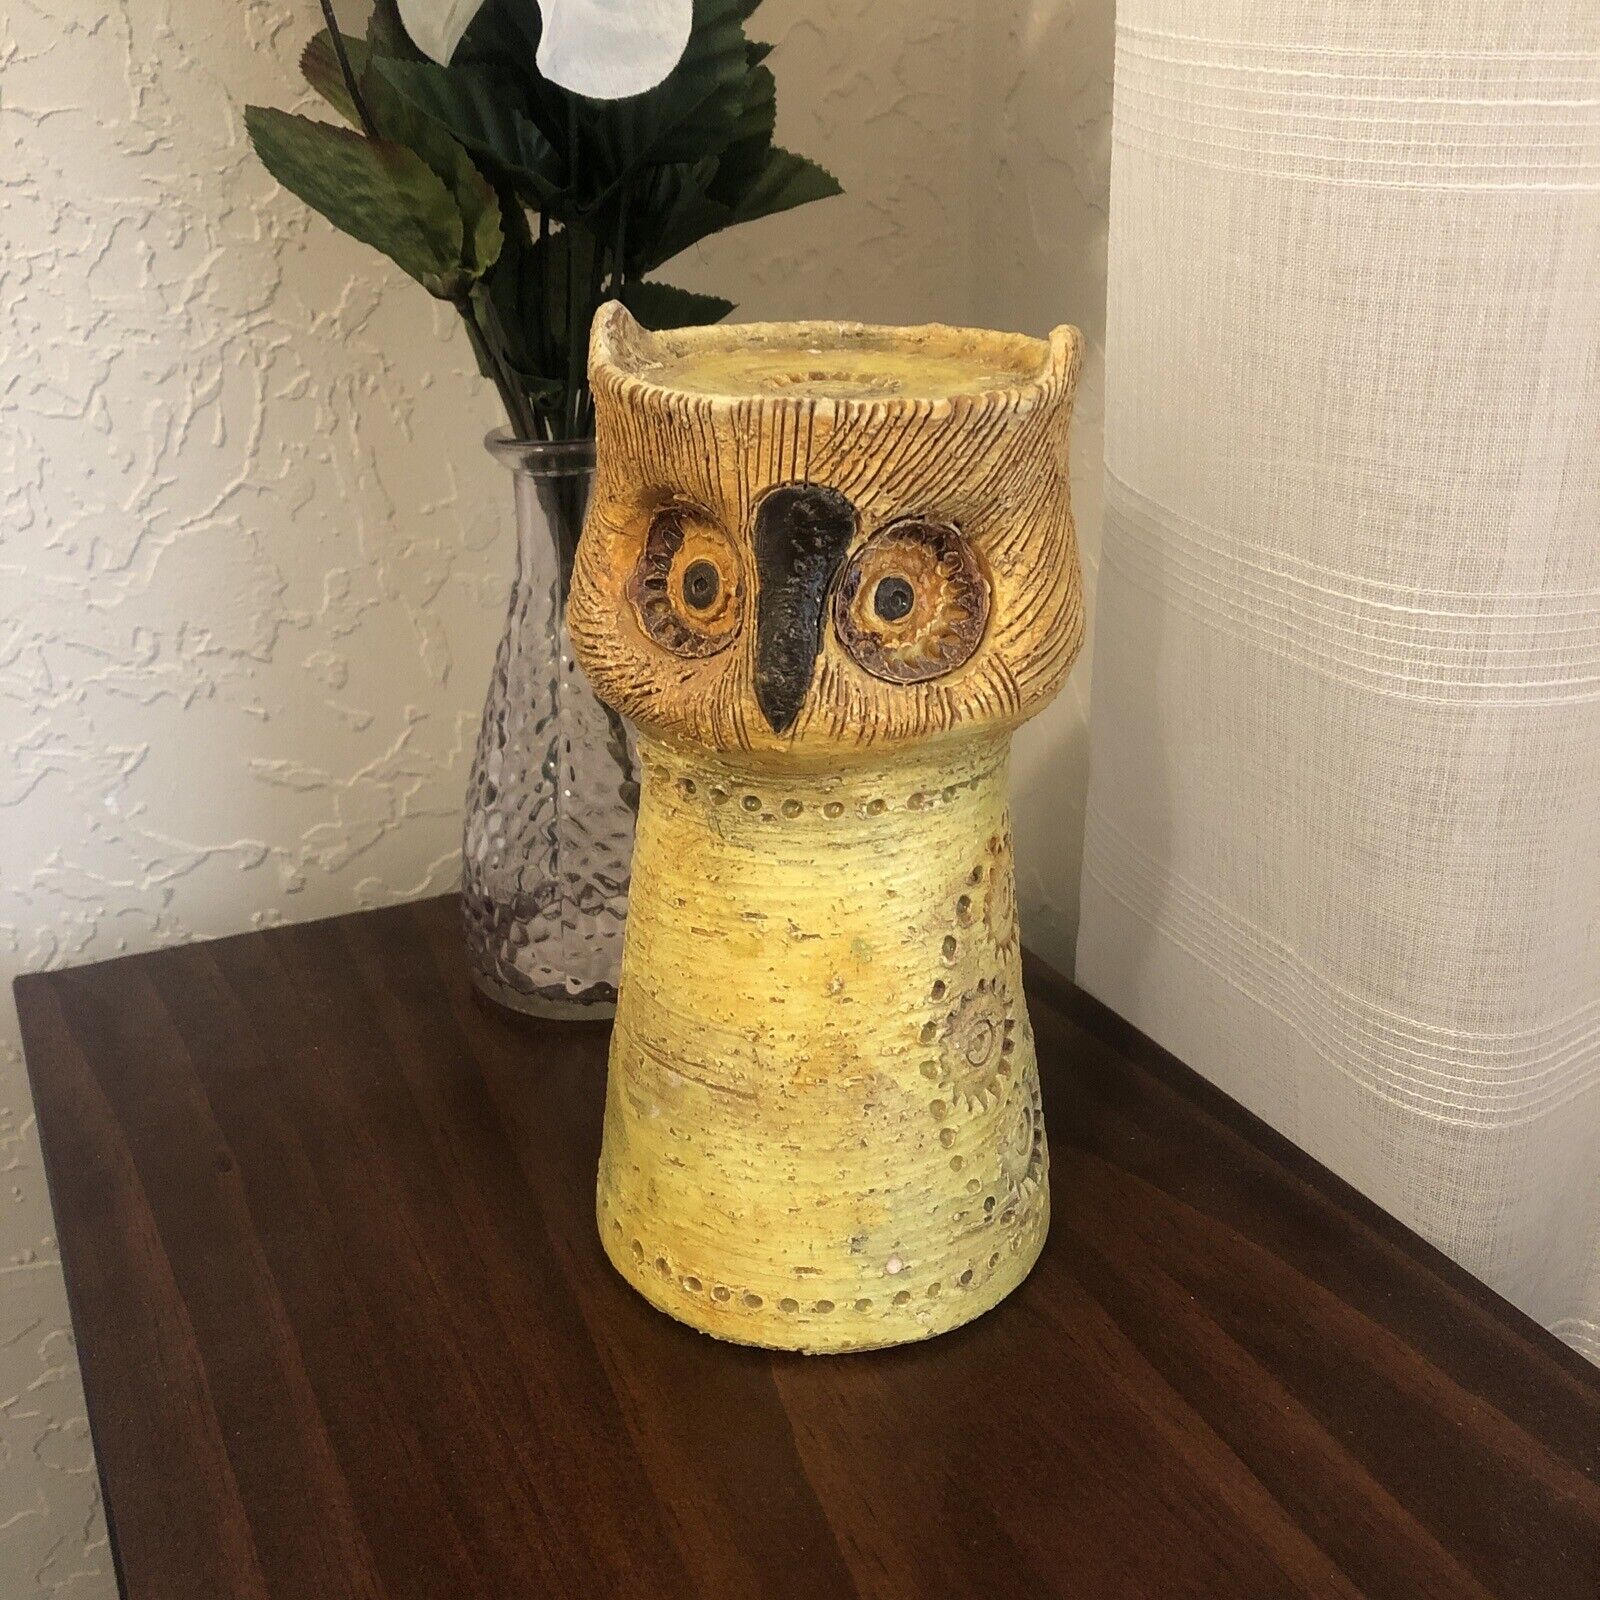 Vintage Bitossi Created in Italy For Rosenthal Netter Ceramic Owl candle holder